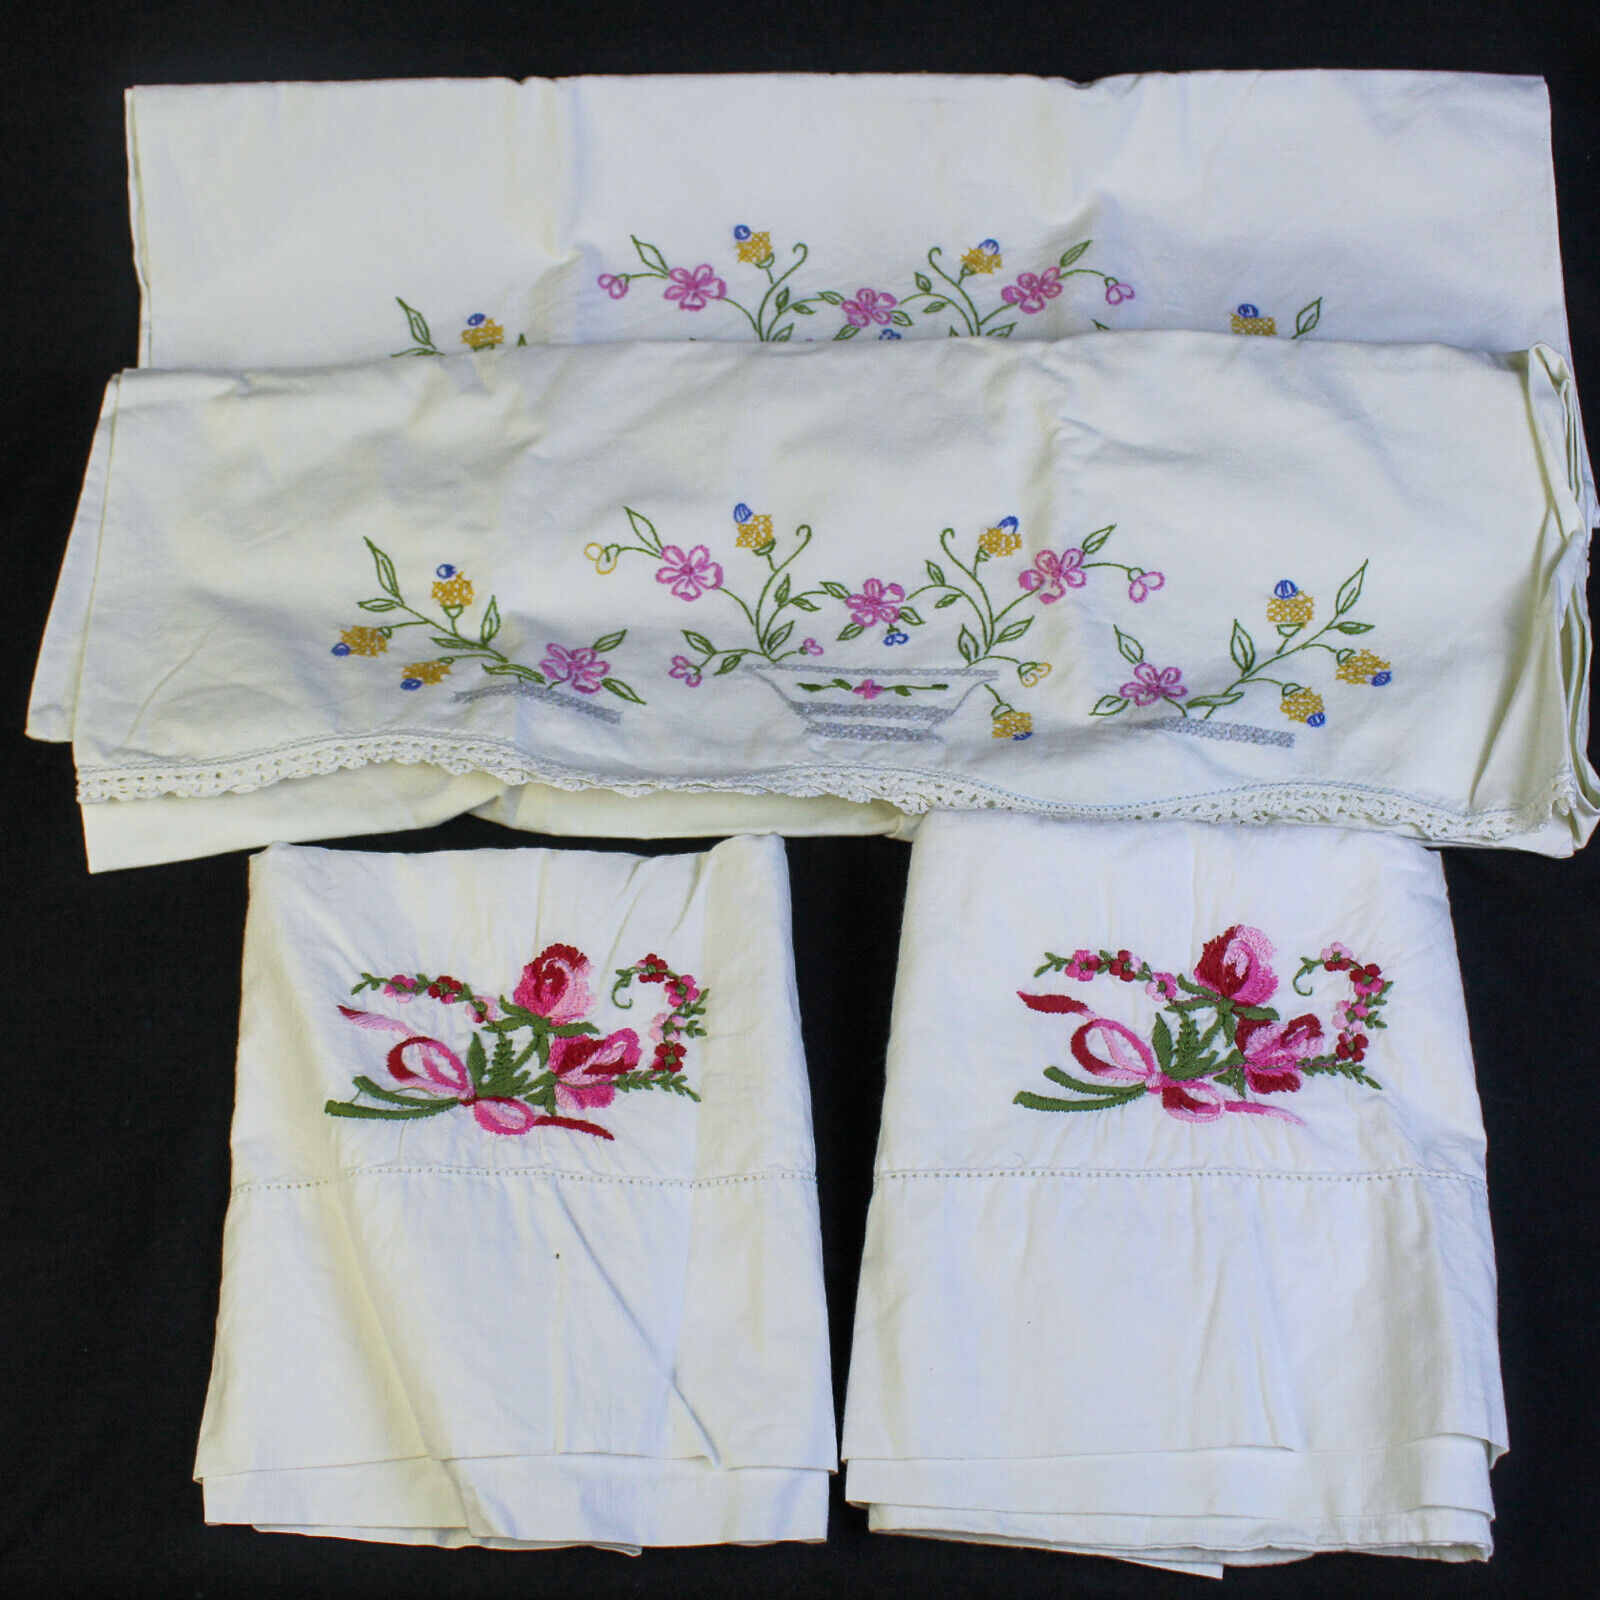 Vintage Lot of 4 Embroidered Standard Pillowcases Crocheted Edge Floral Flaws